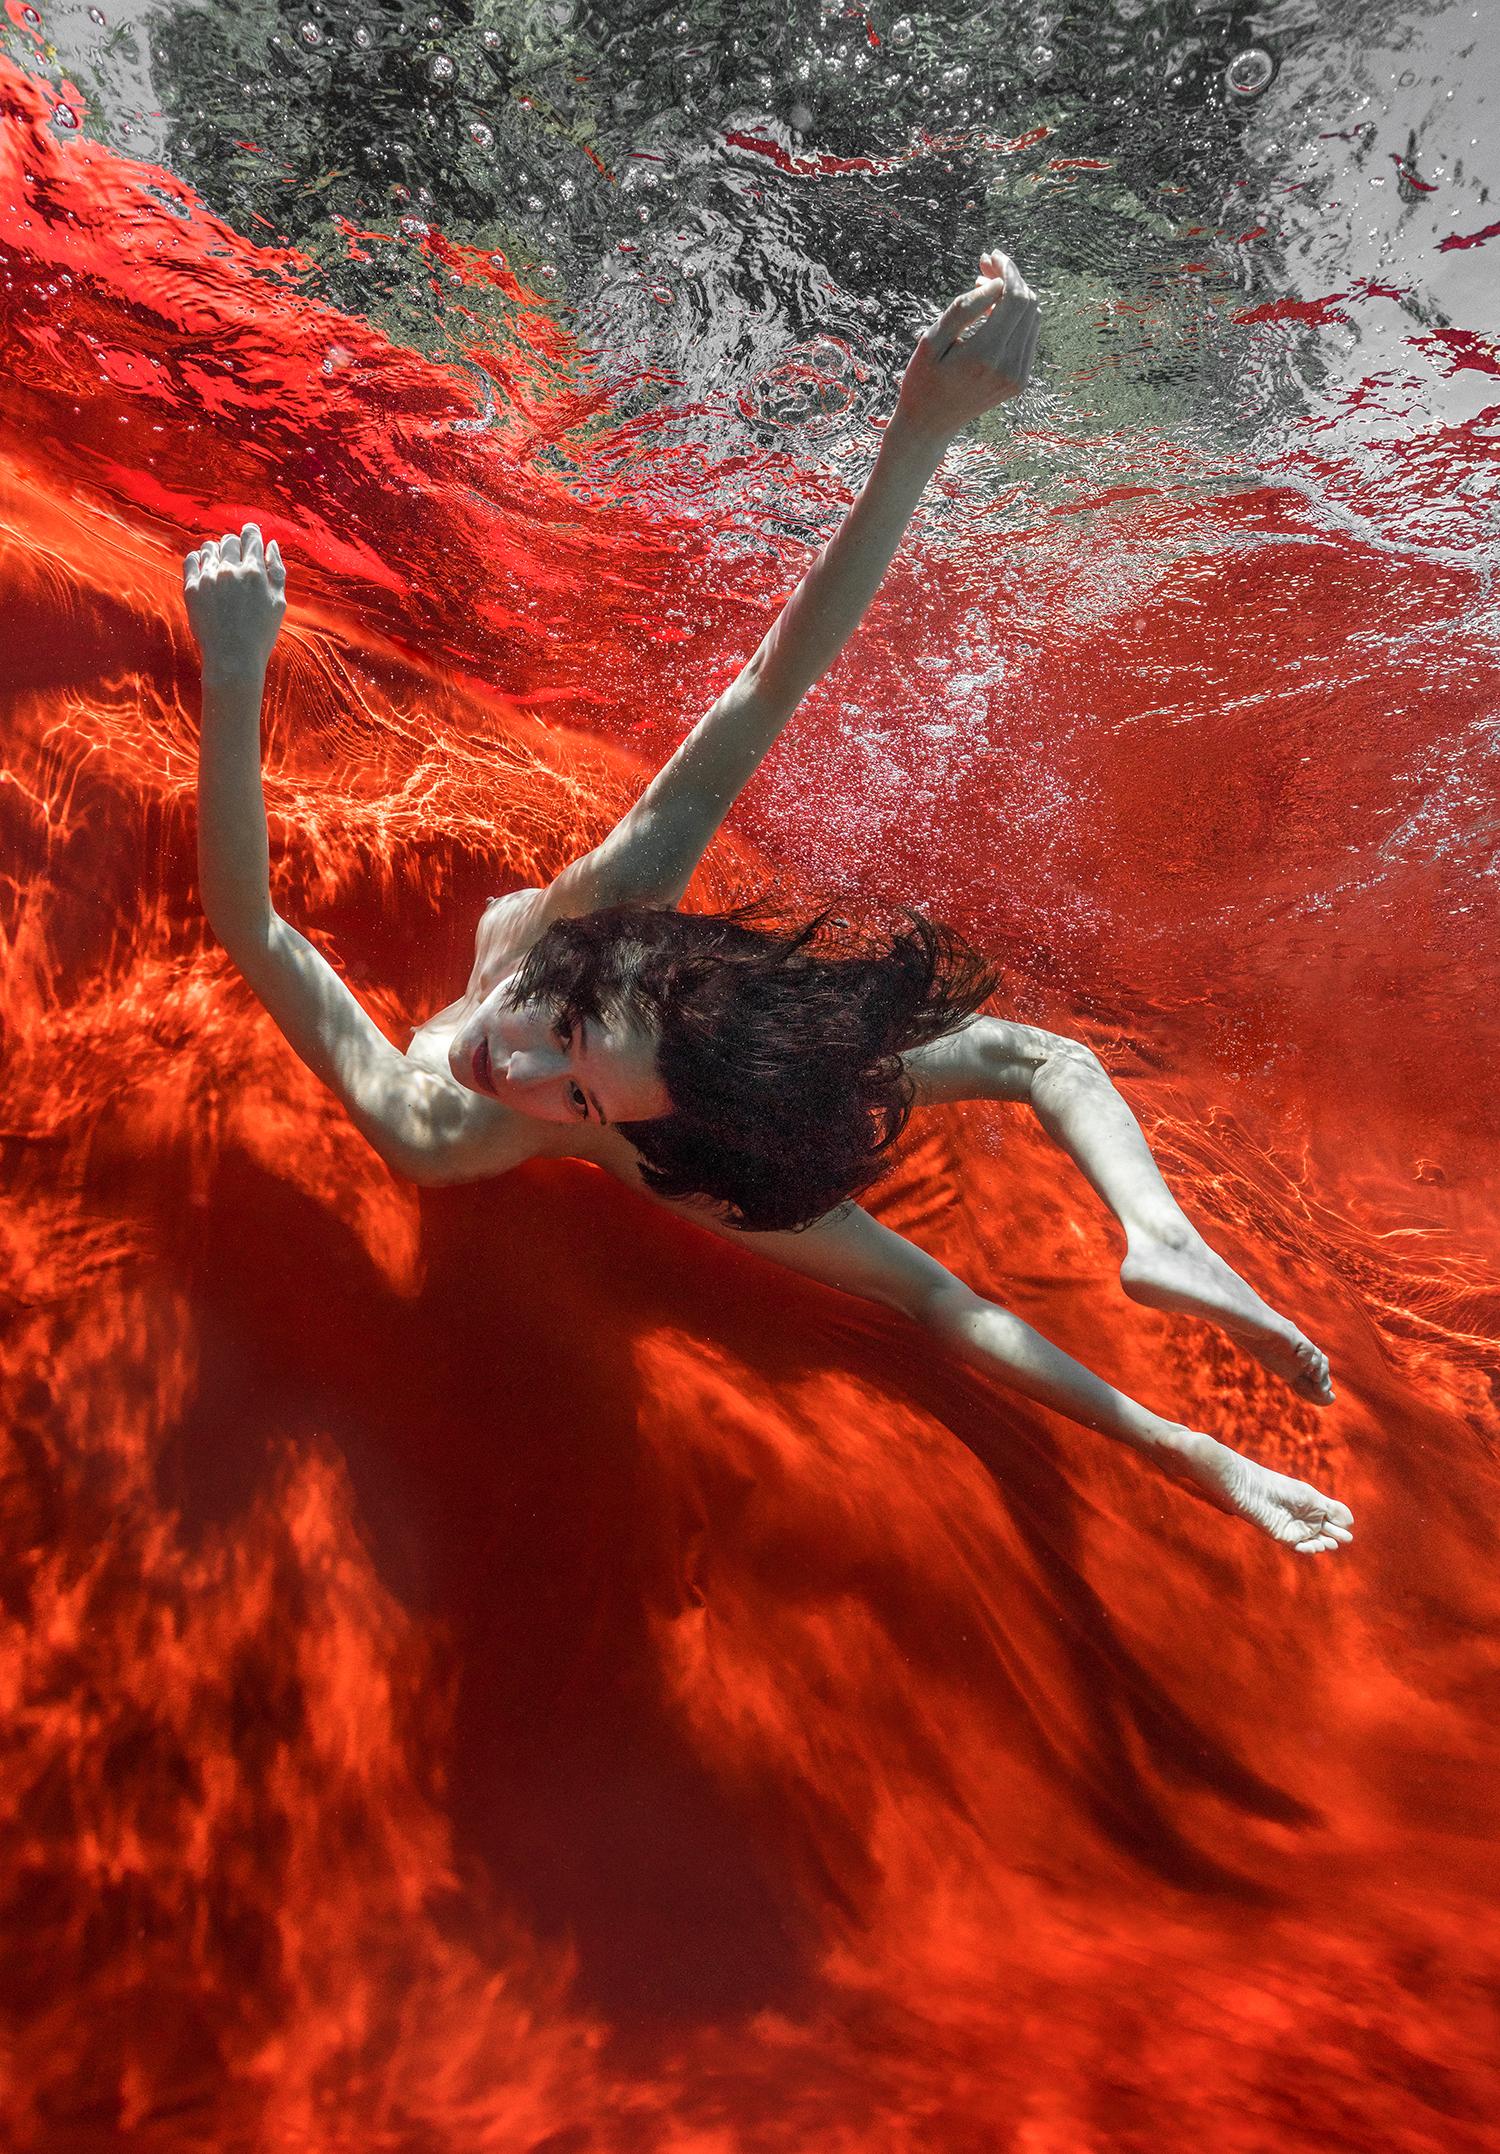 Alex Sher Nude Photograph - Wild Blood - underwater nude photograph - print on aluminum 36x24"